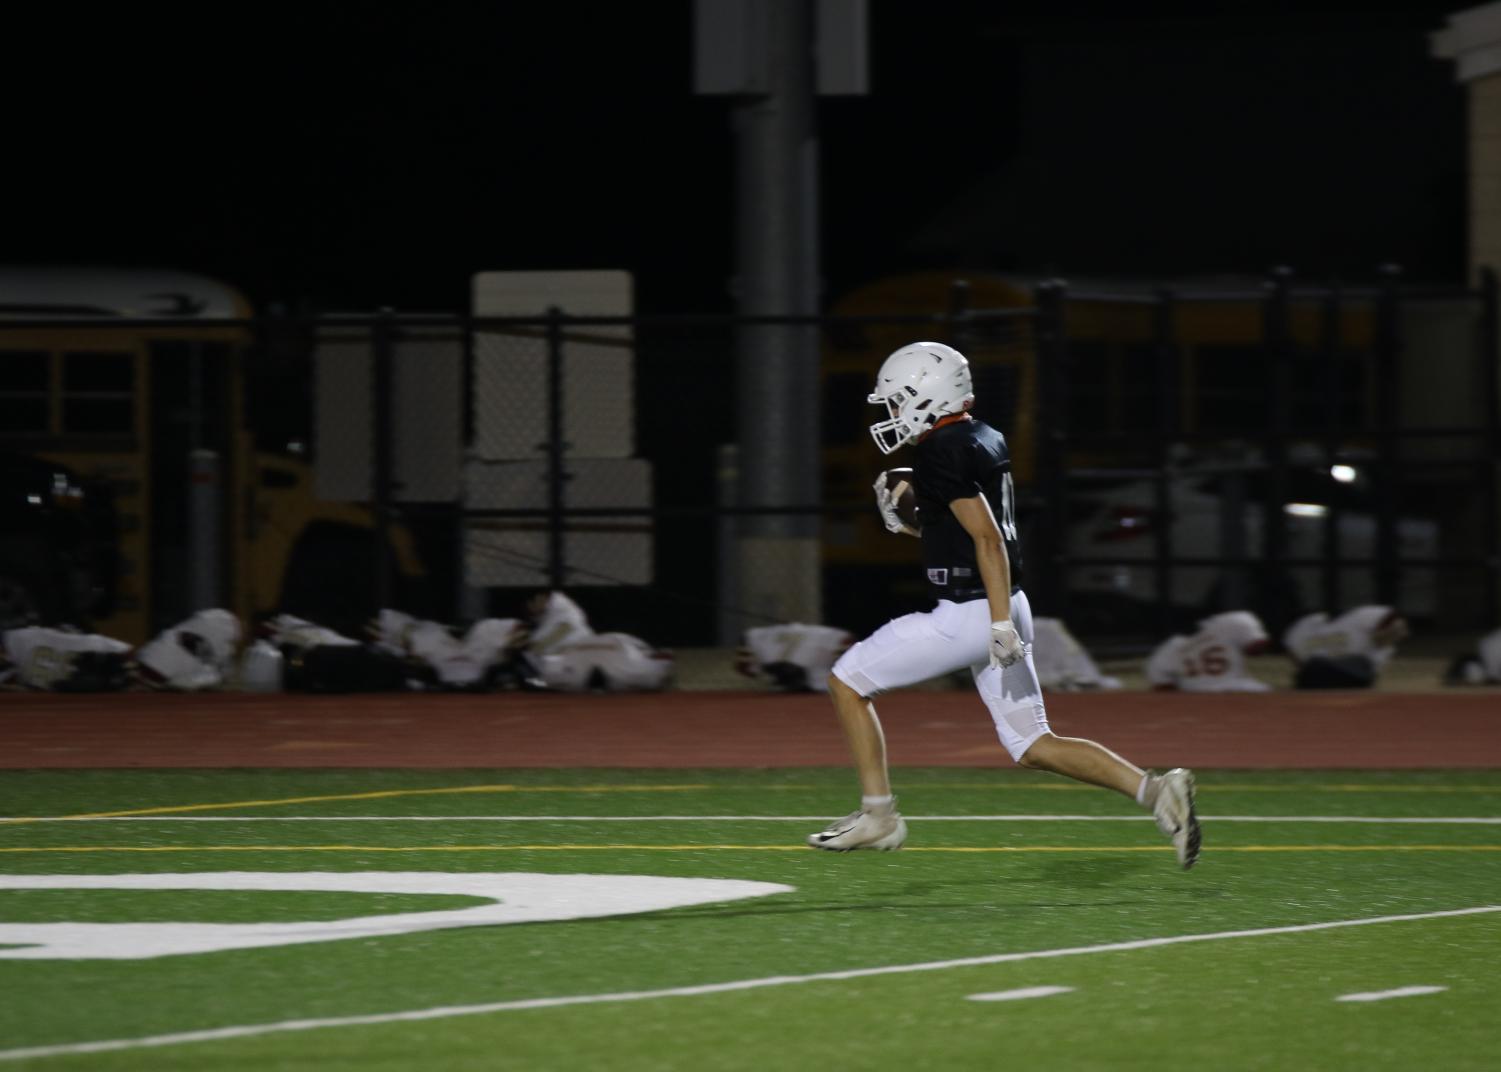 GALLERY%3A+Varsity+Football+Faces+Off+in+Preseason+Scrimmage+vs.+Rouse